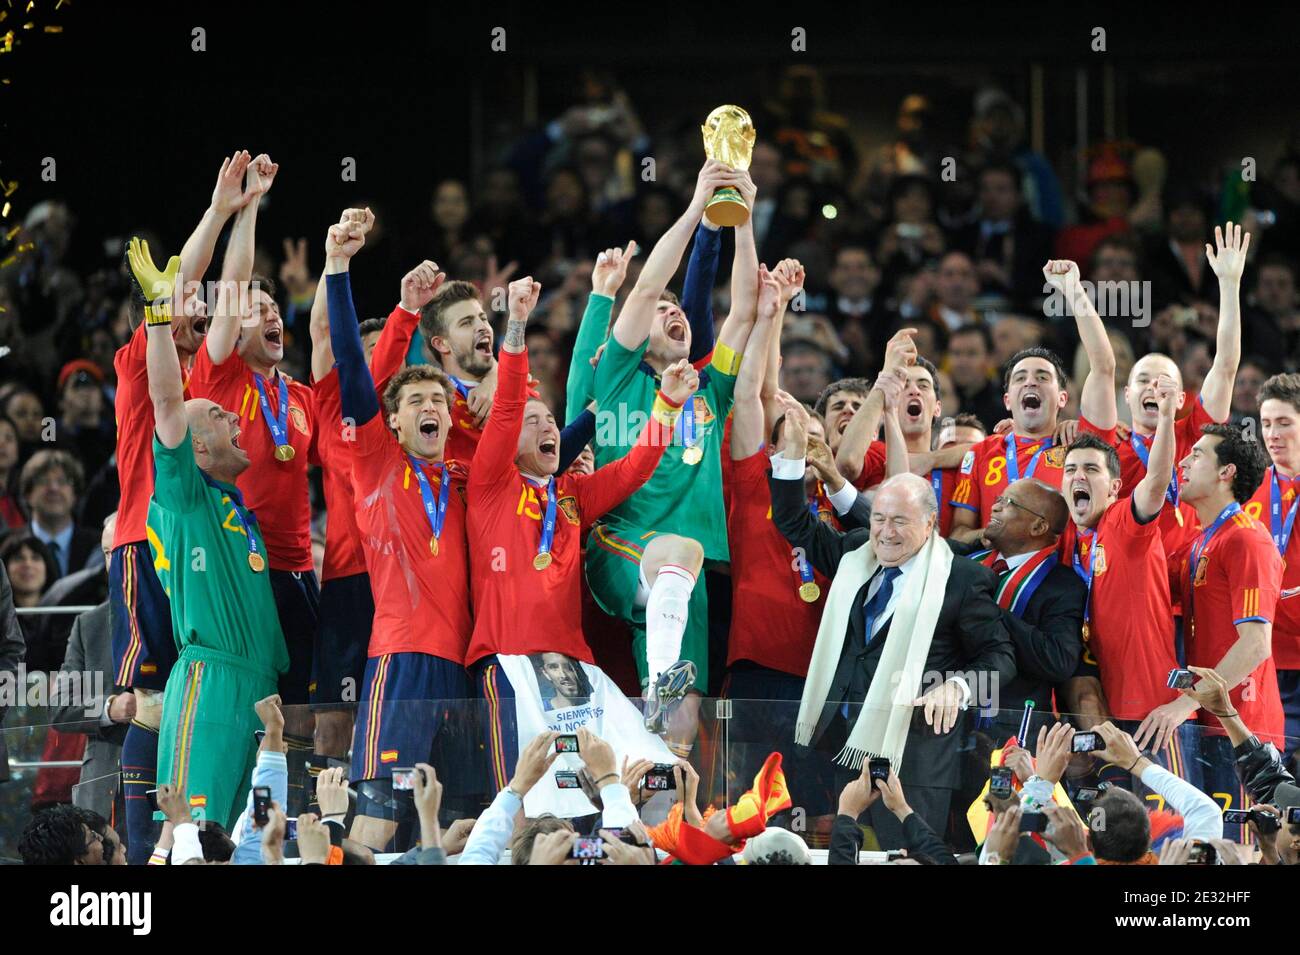 Spanish players celebrate with the trophy following the 2010 FIFA World Cup South Africa Final Soccer match, Spain vs Netherlands at Soccer City football stadium in Johannesburg, South Africa on July 11th, 2010. Spain won 1-0. Photo by Henri Szwarc/ABACAPRESS.COM Stock Photo